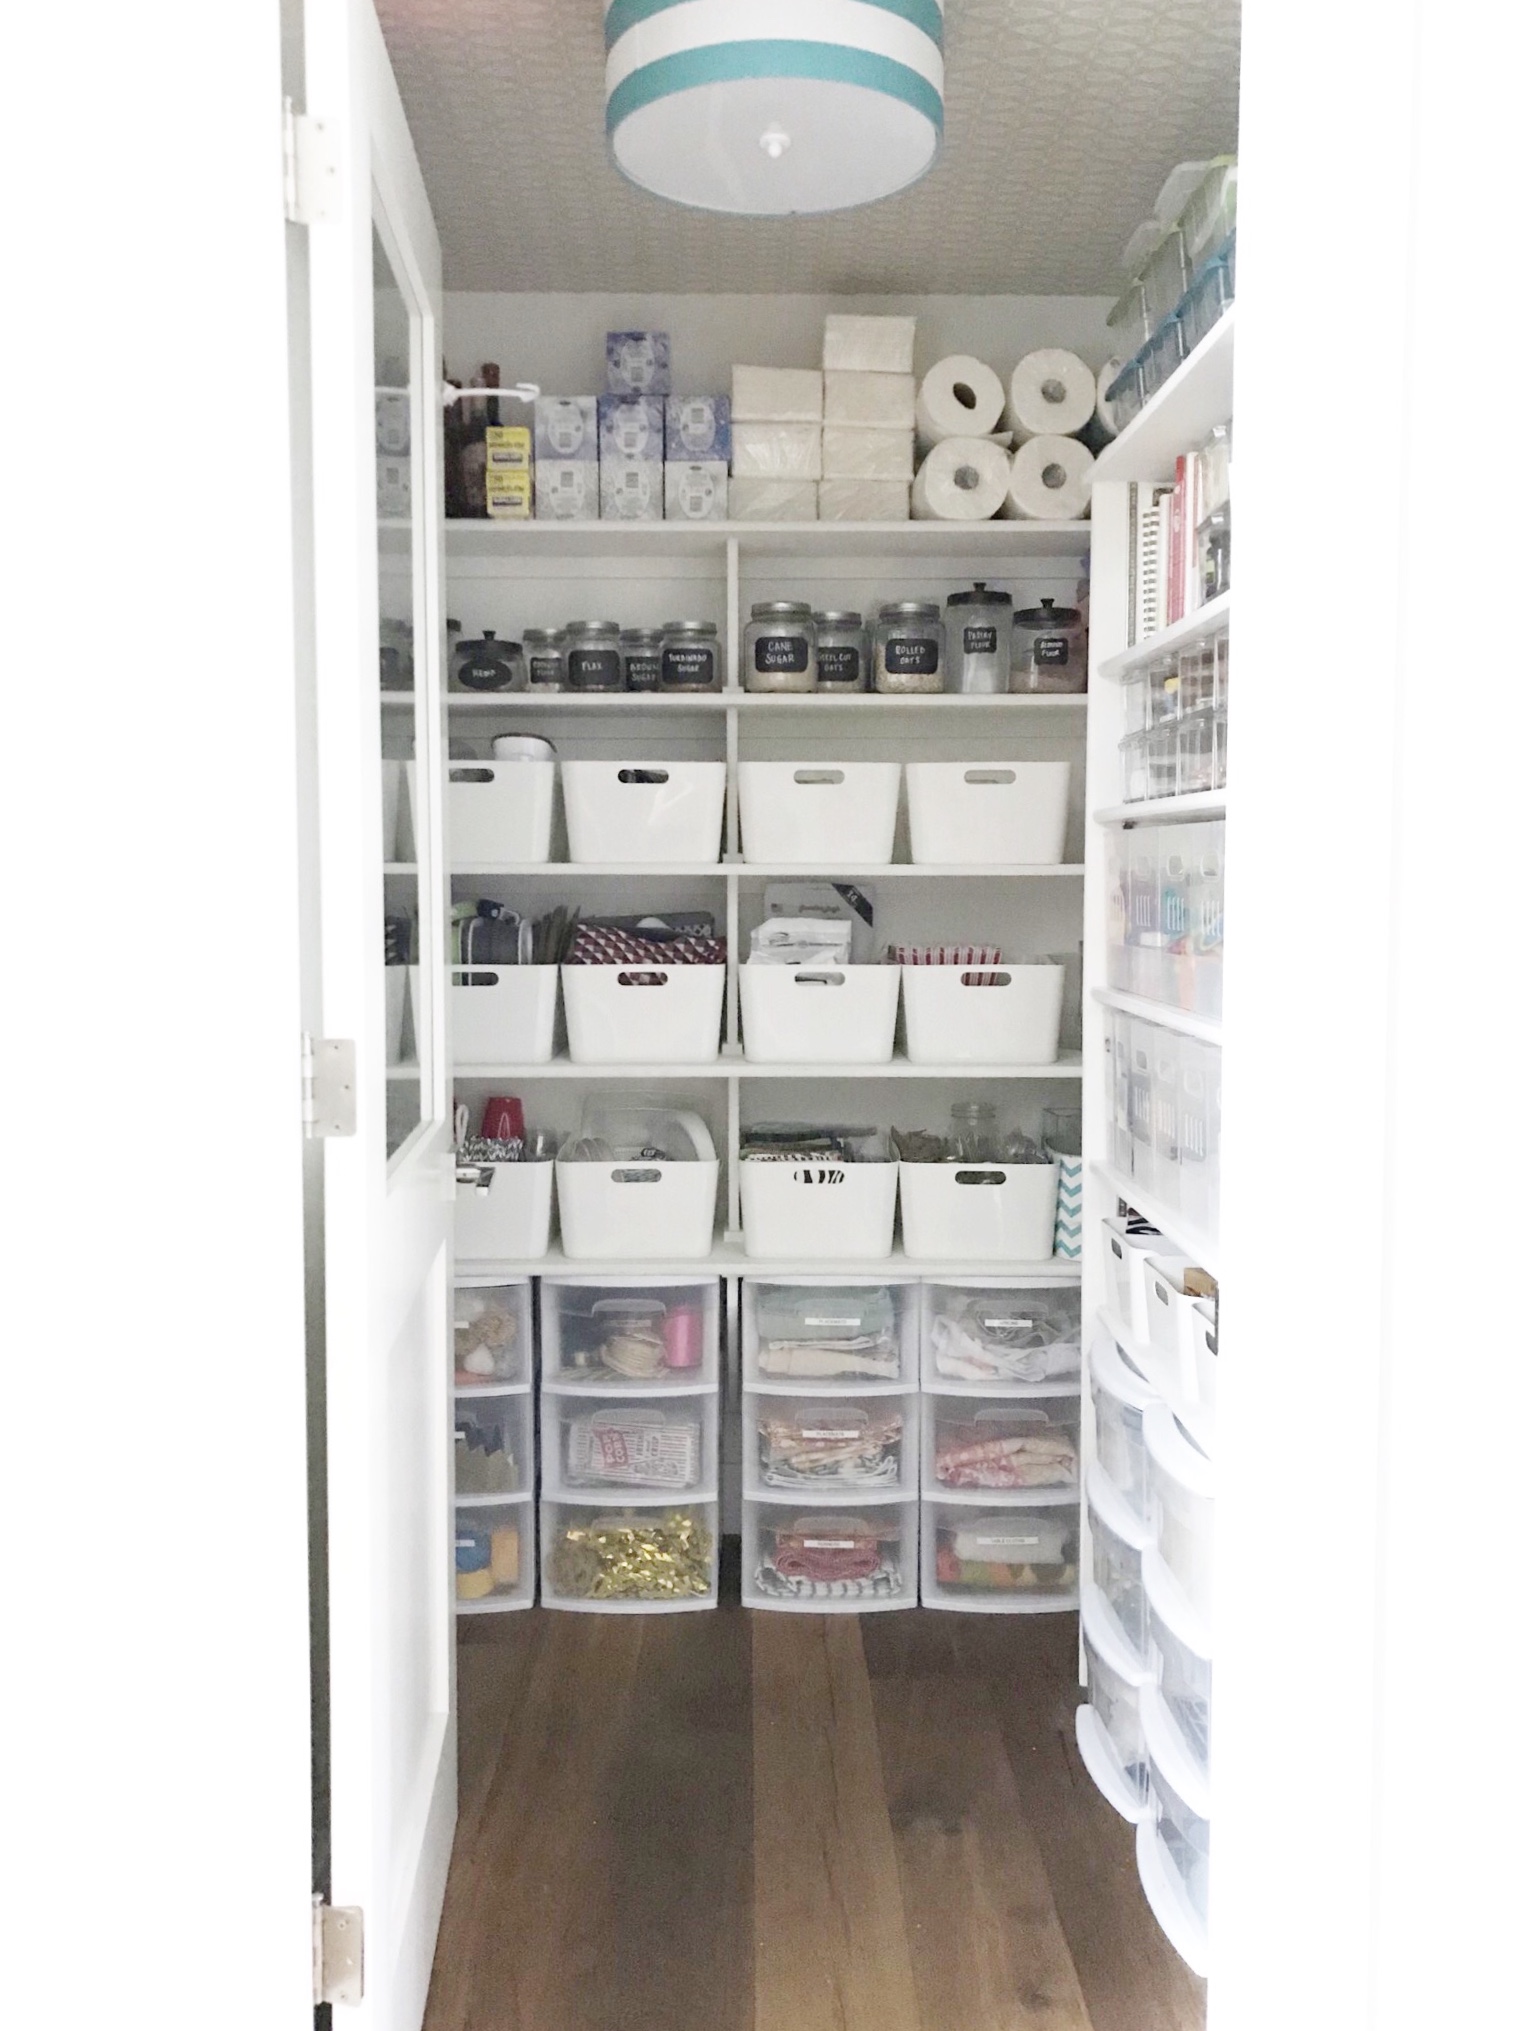 https://simplyorganized.me/wp-content/uploads/2018/08/How-To-Organize-A-Beauitful-Pantry.jpg